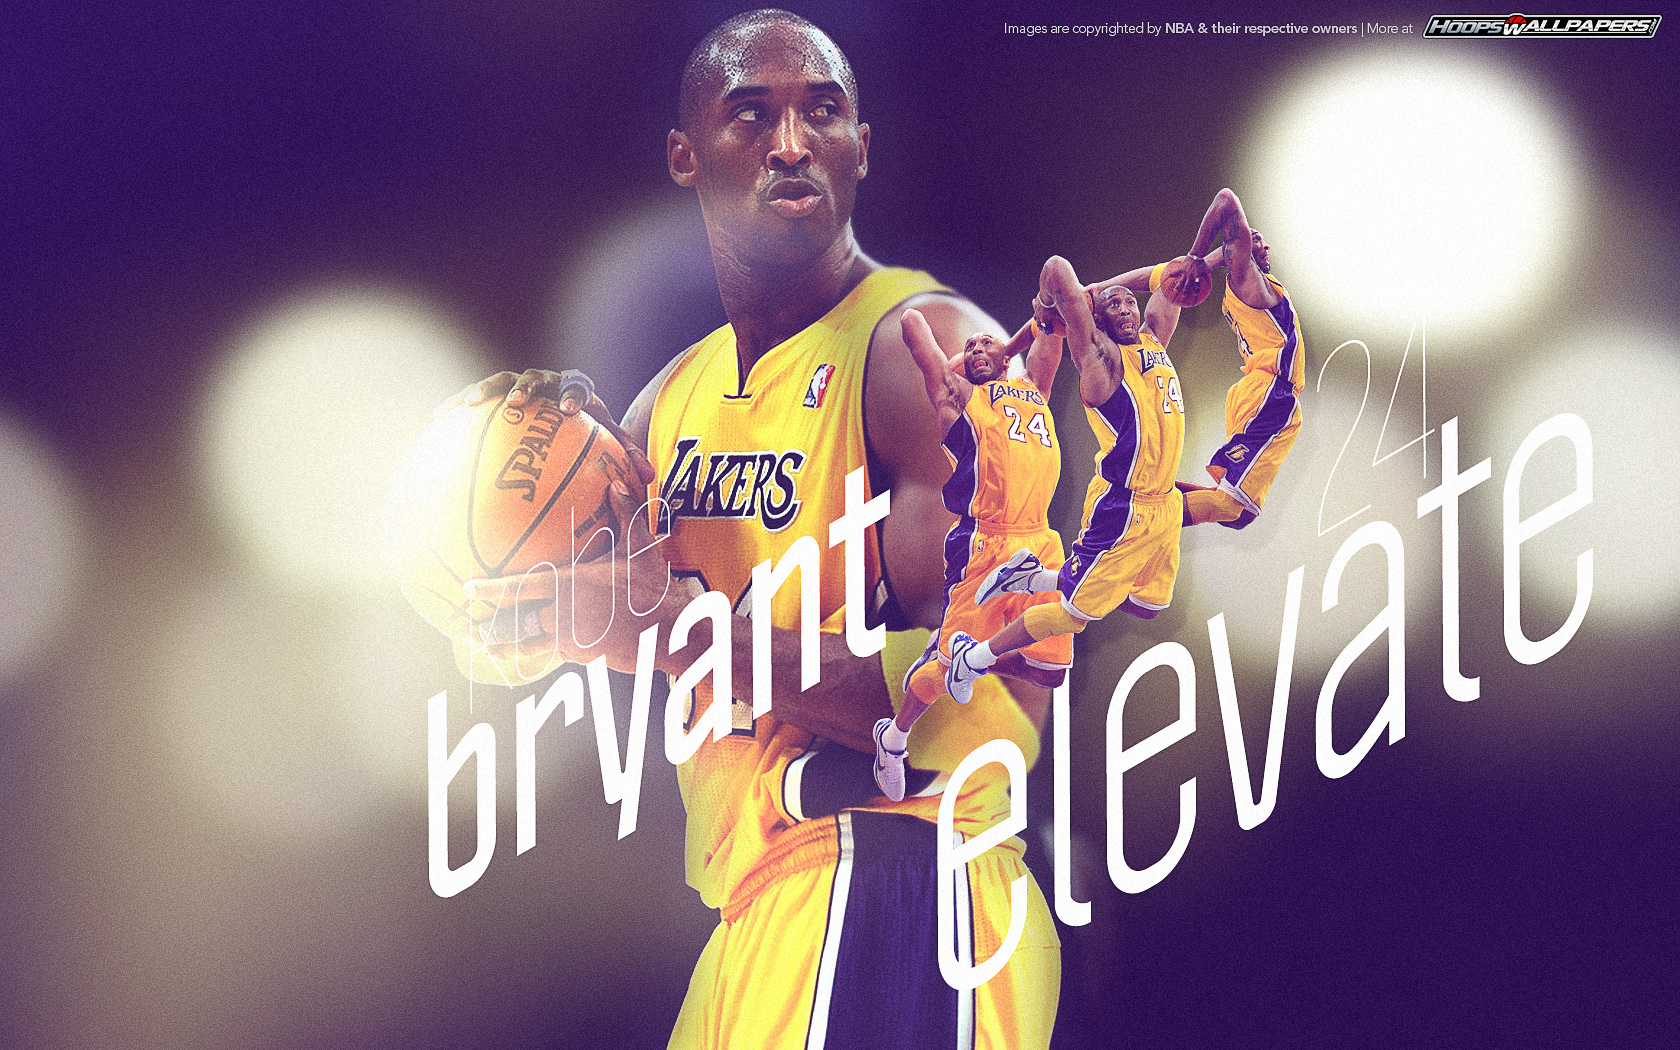 Newest Nba And Basketball Wallpaper For Kobe Bryant